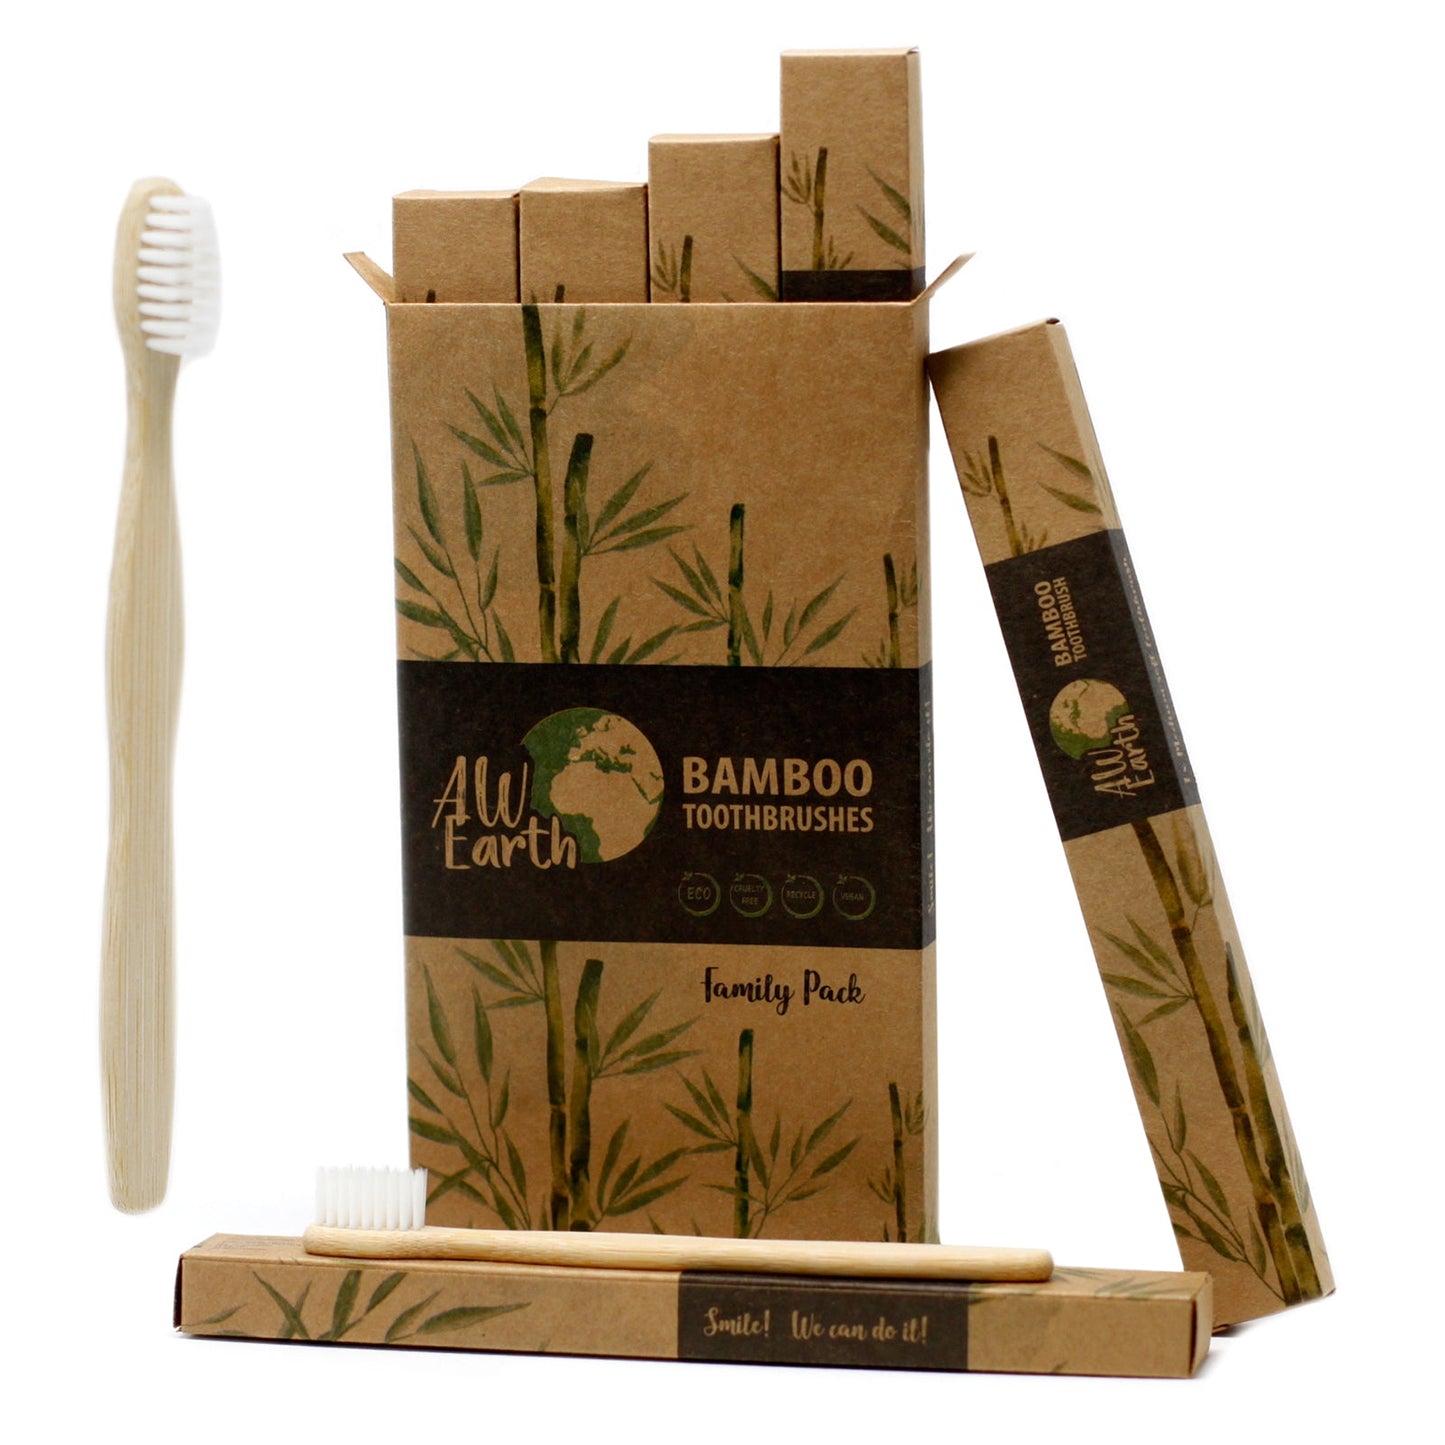 Bamboo Toothbrush - White - Family Pack of 4 Toothbrushes Ancient Wisdom 